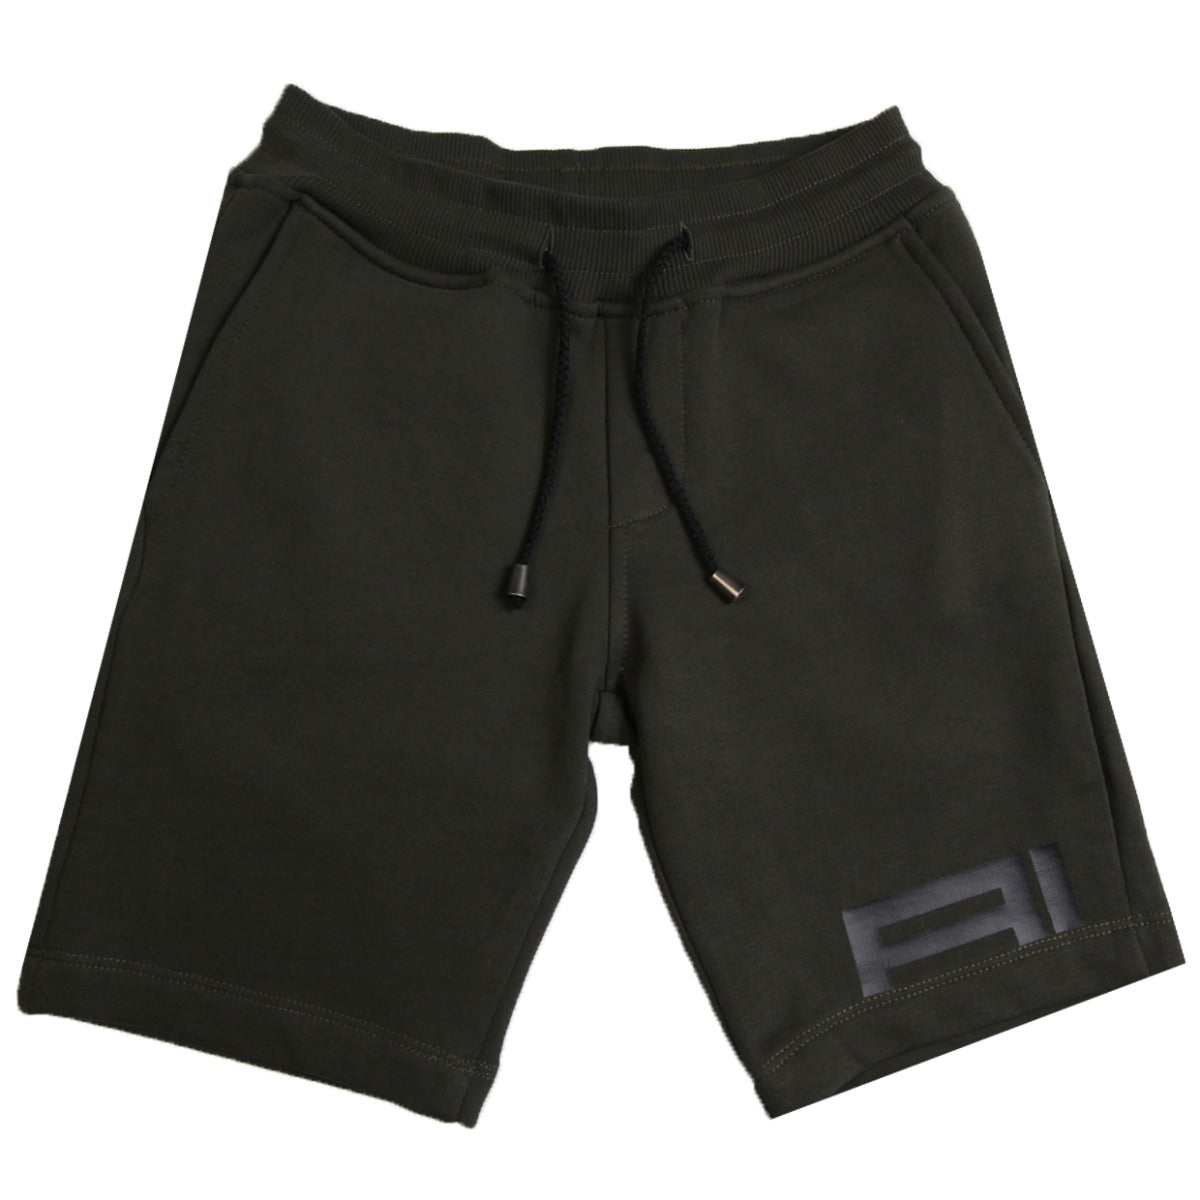 AI Riders On The Storm Khaki Fleece Short Front View 